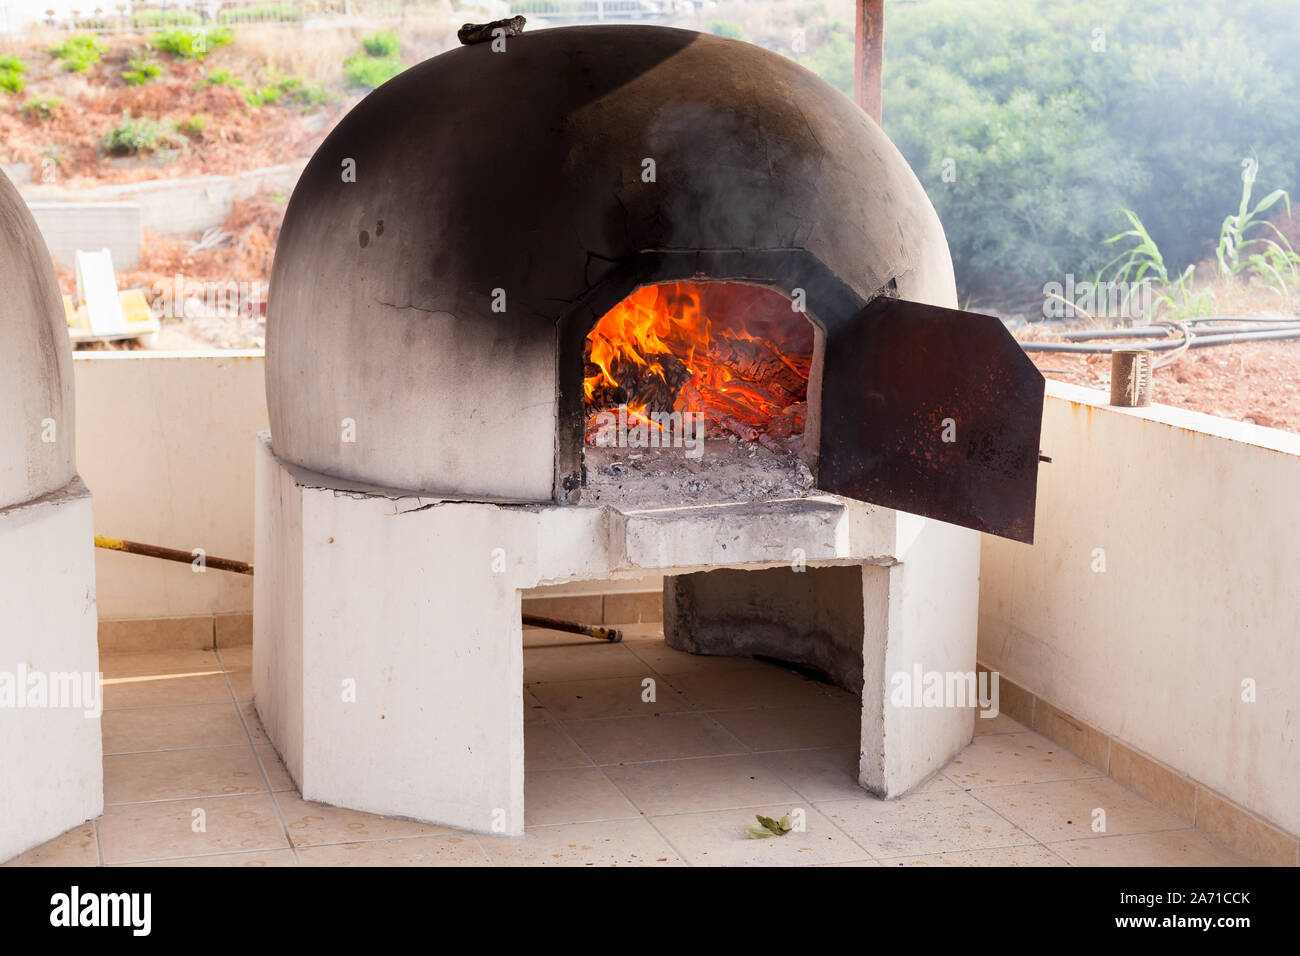 Traditional outdoor Greek and Cyprus kleftiko oven with burning fire inside Stock Photo